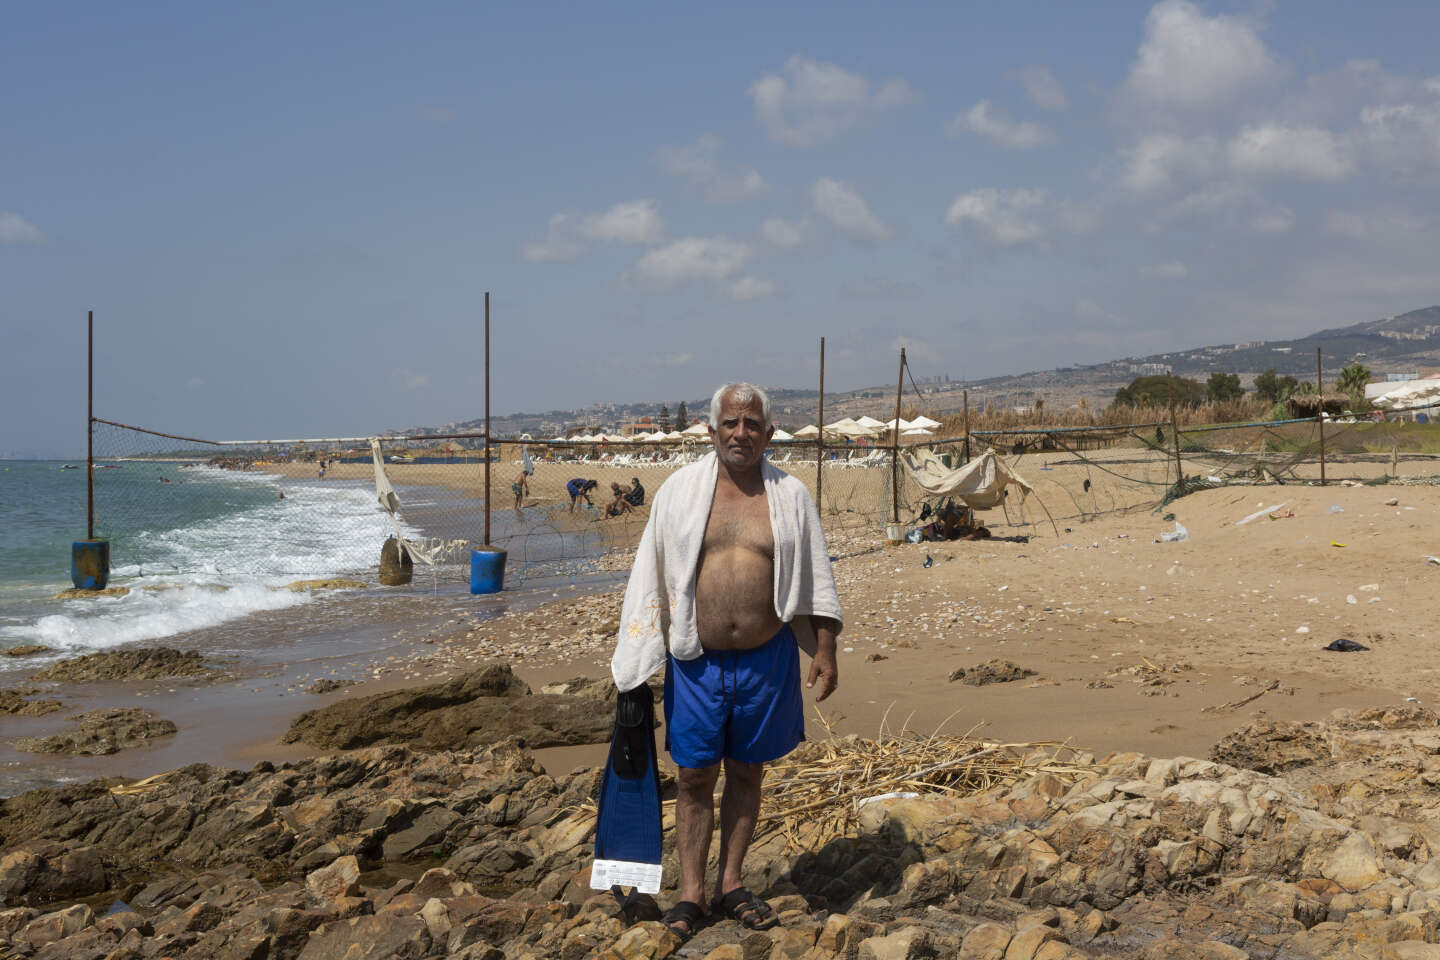 In Lebanon, public beaches are disappearing